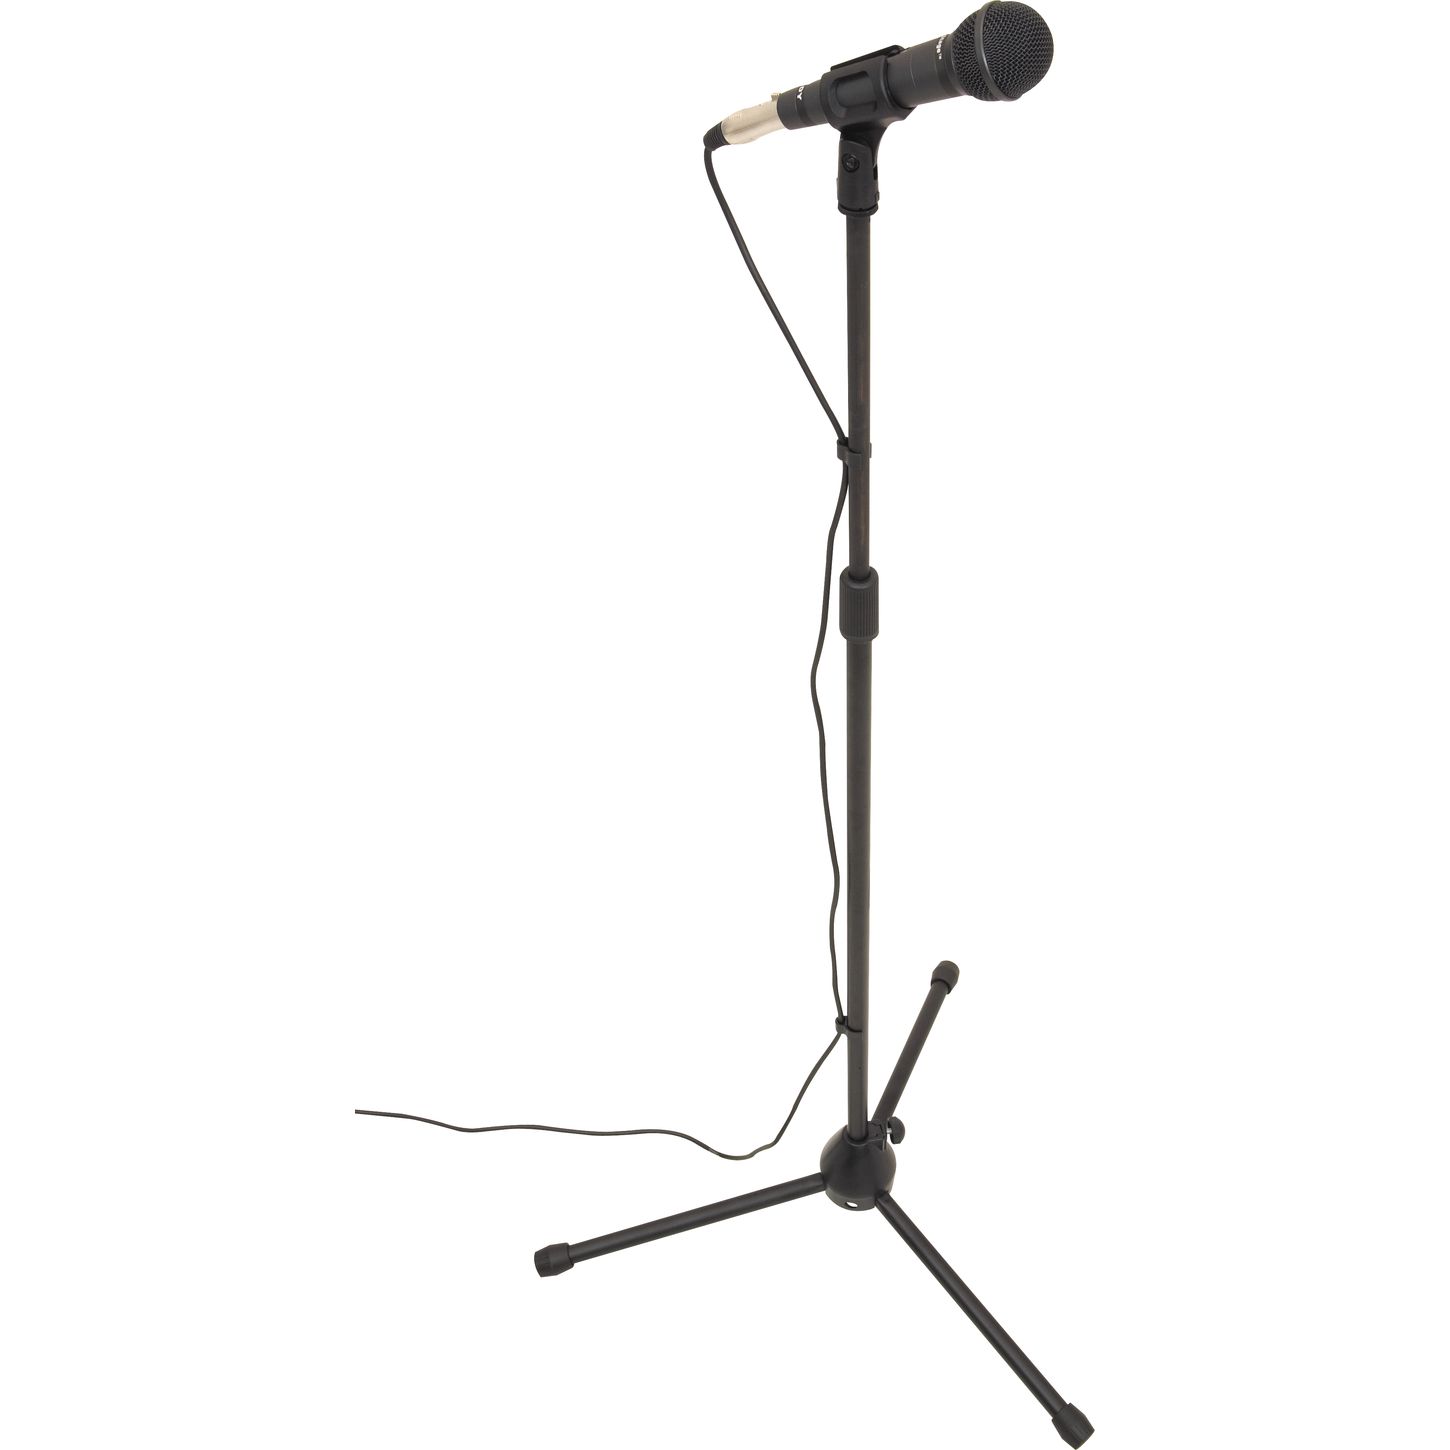 Included vocal mic.